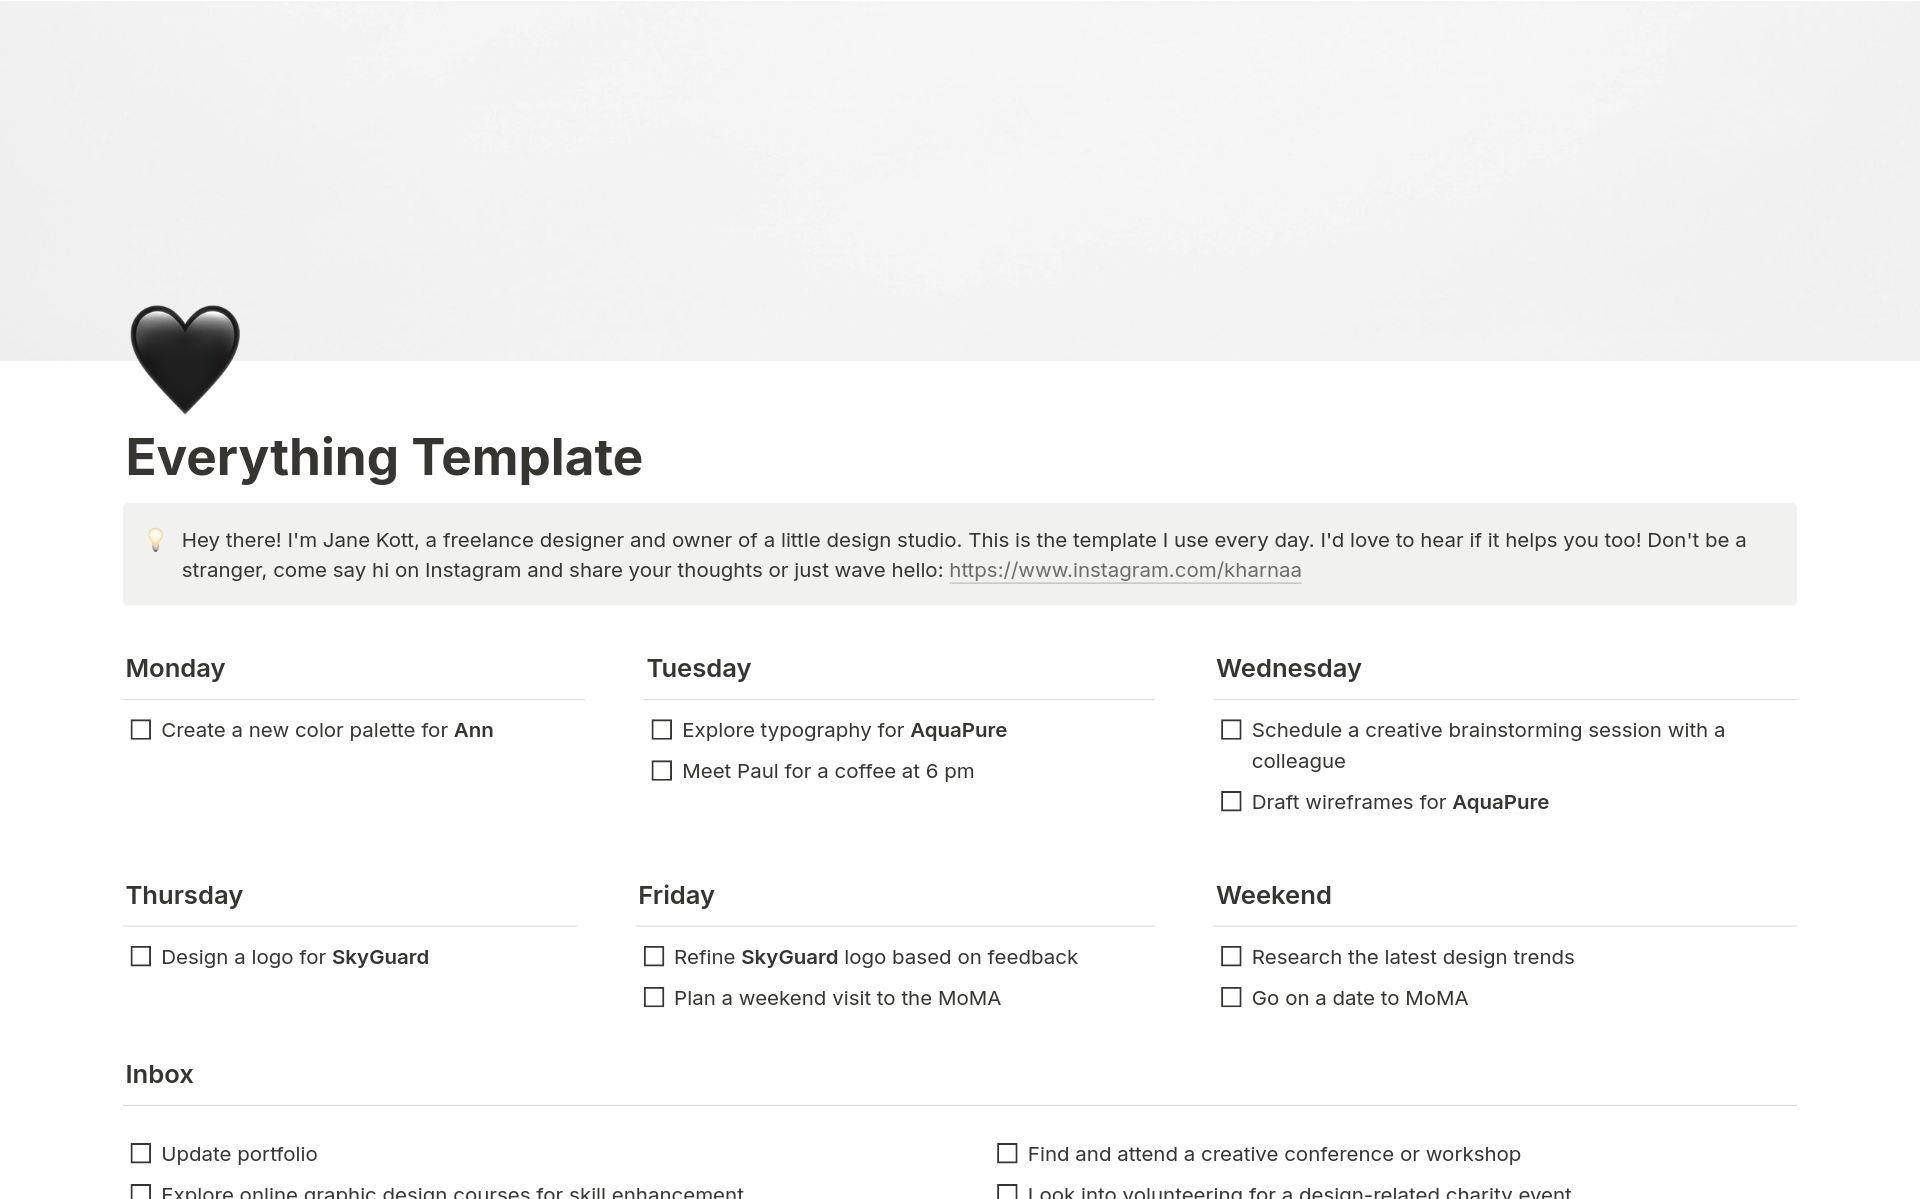 An all-in-one simple Notion template is designed for freelancers to keep life and work beautifully organized.